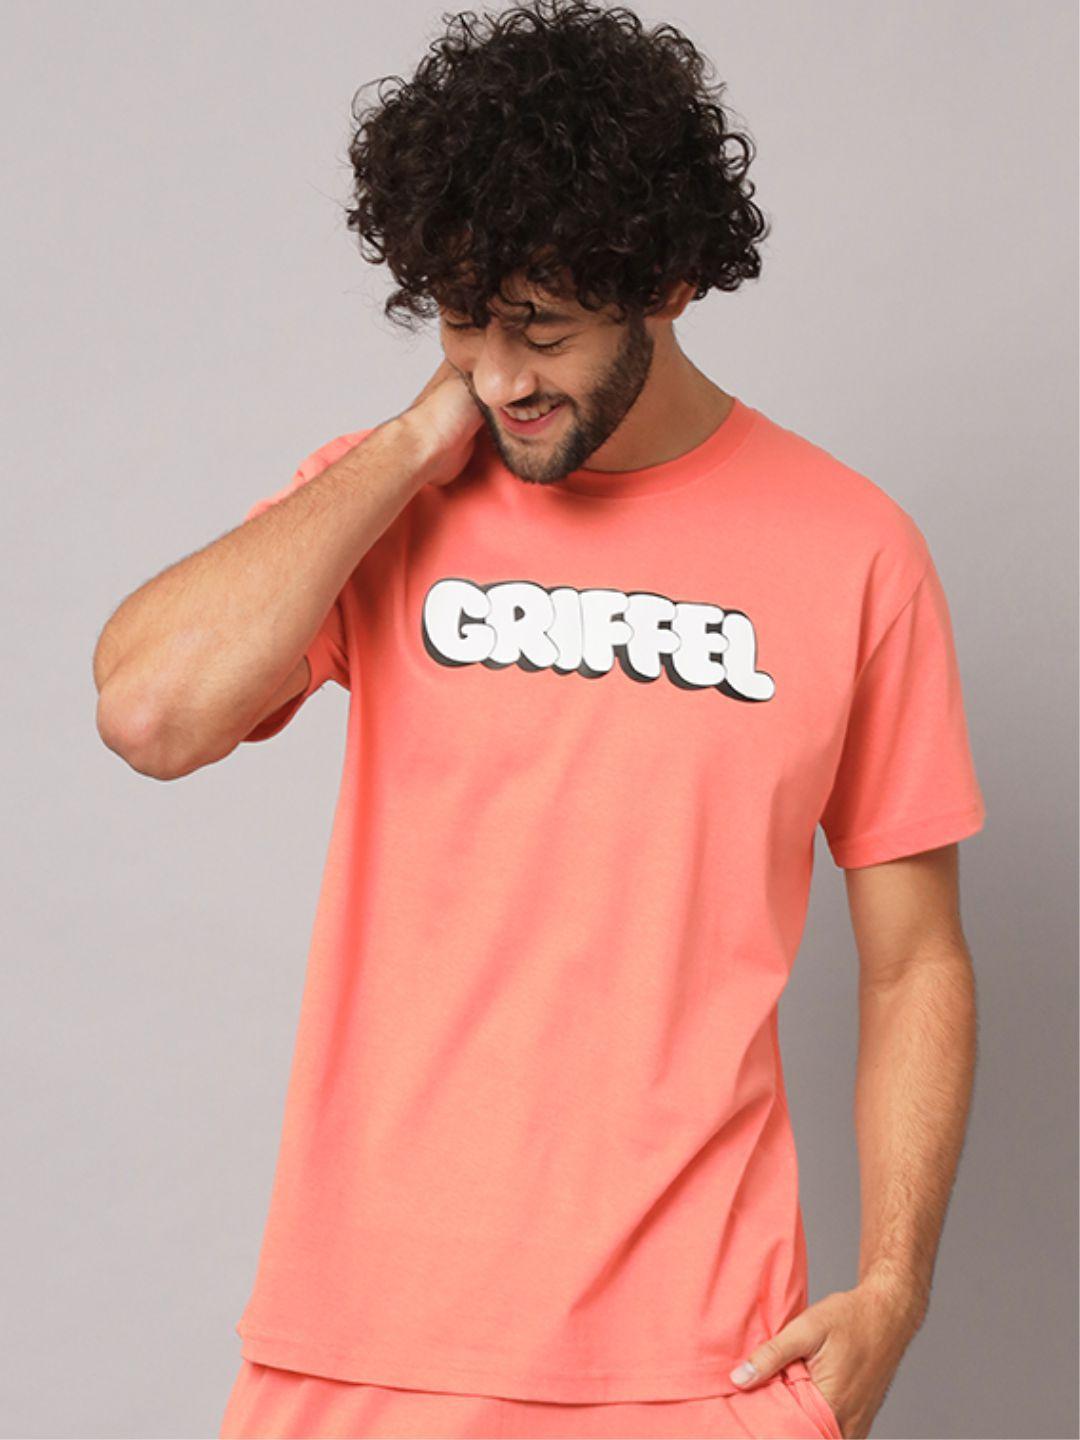 griffel typography printed pure cotton t-shirt